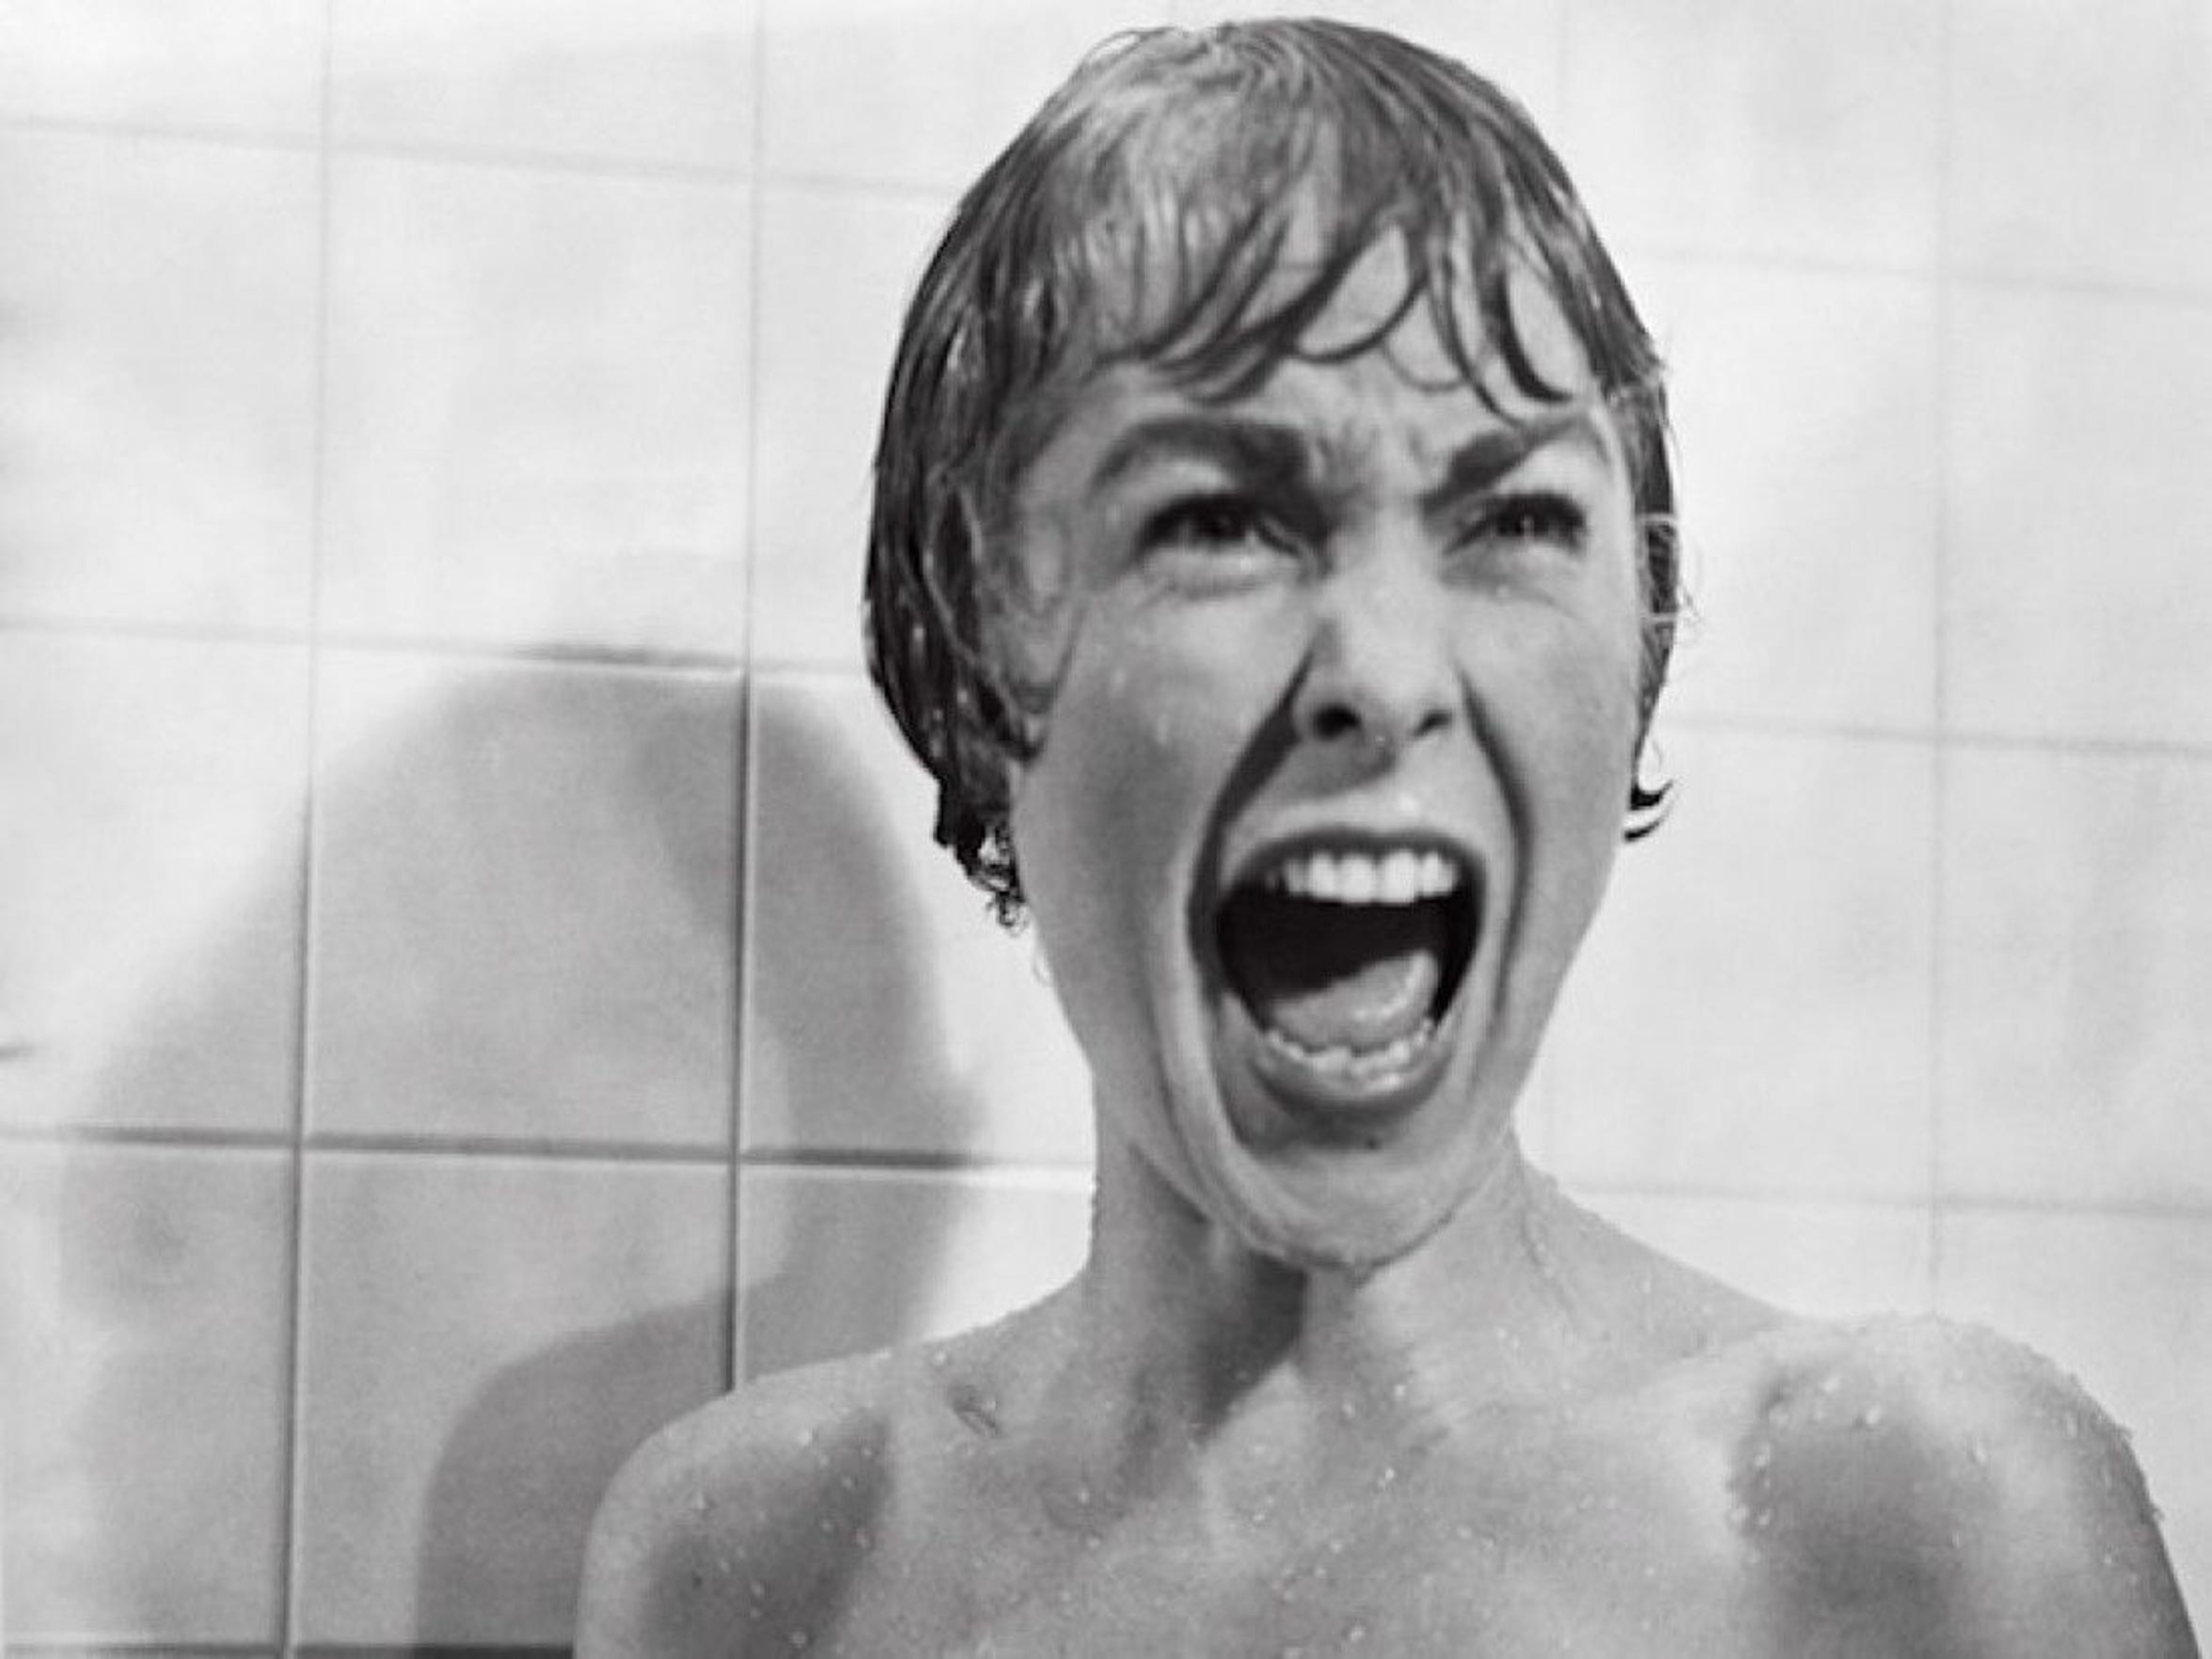 Janet Leigh screams in an iconic scene from Alfred Hitchcock's classic "Psycho." The book was based on the novel of the same name by Wisconsin author Robert Bloch.